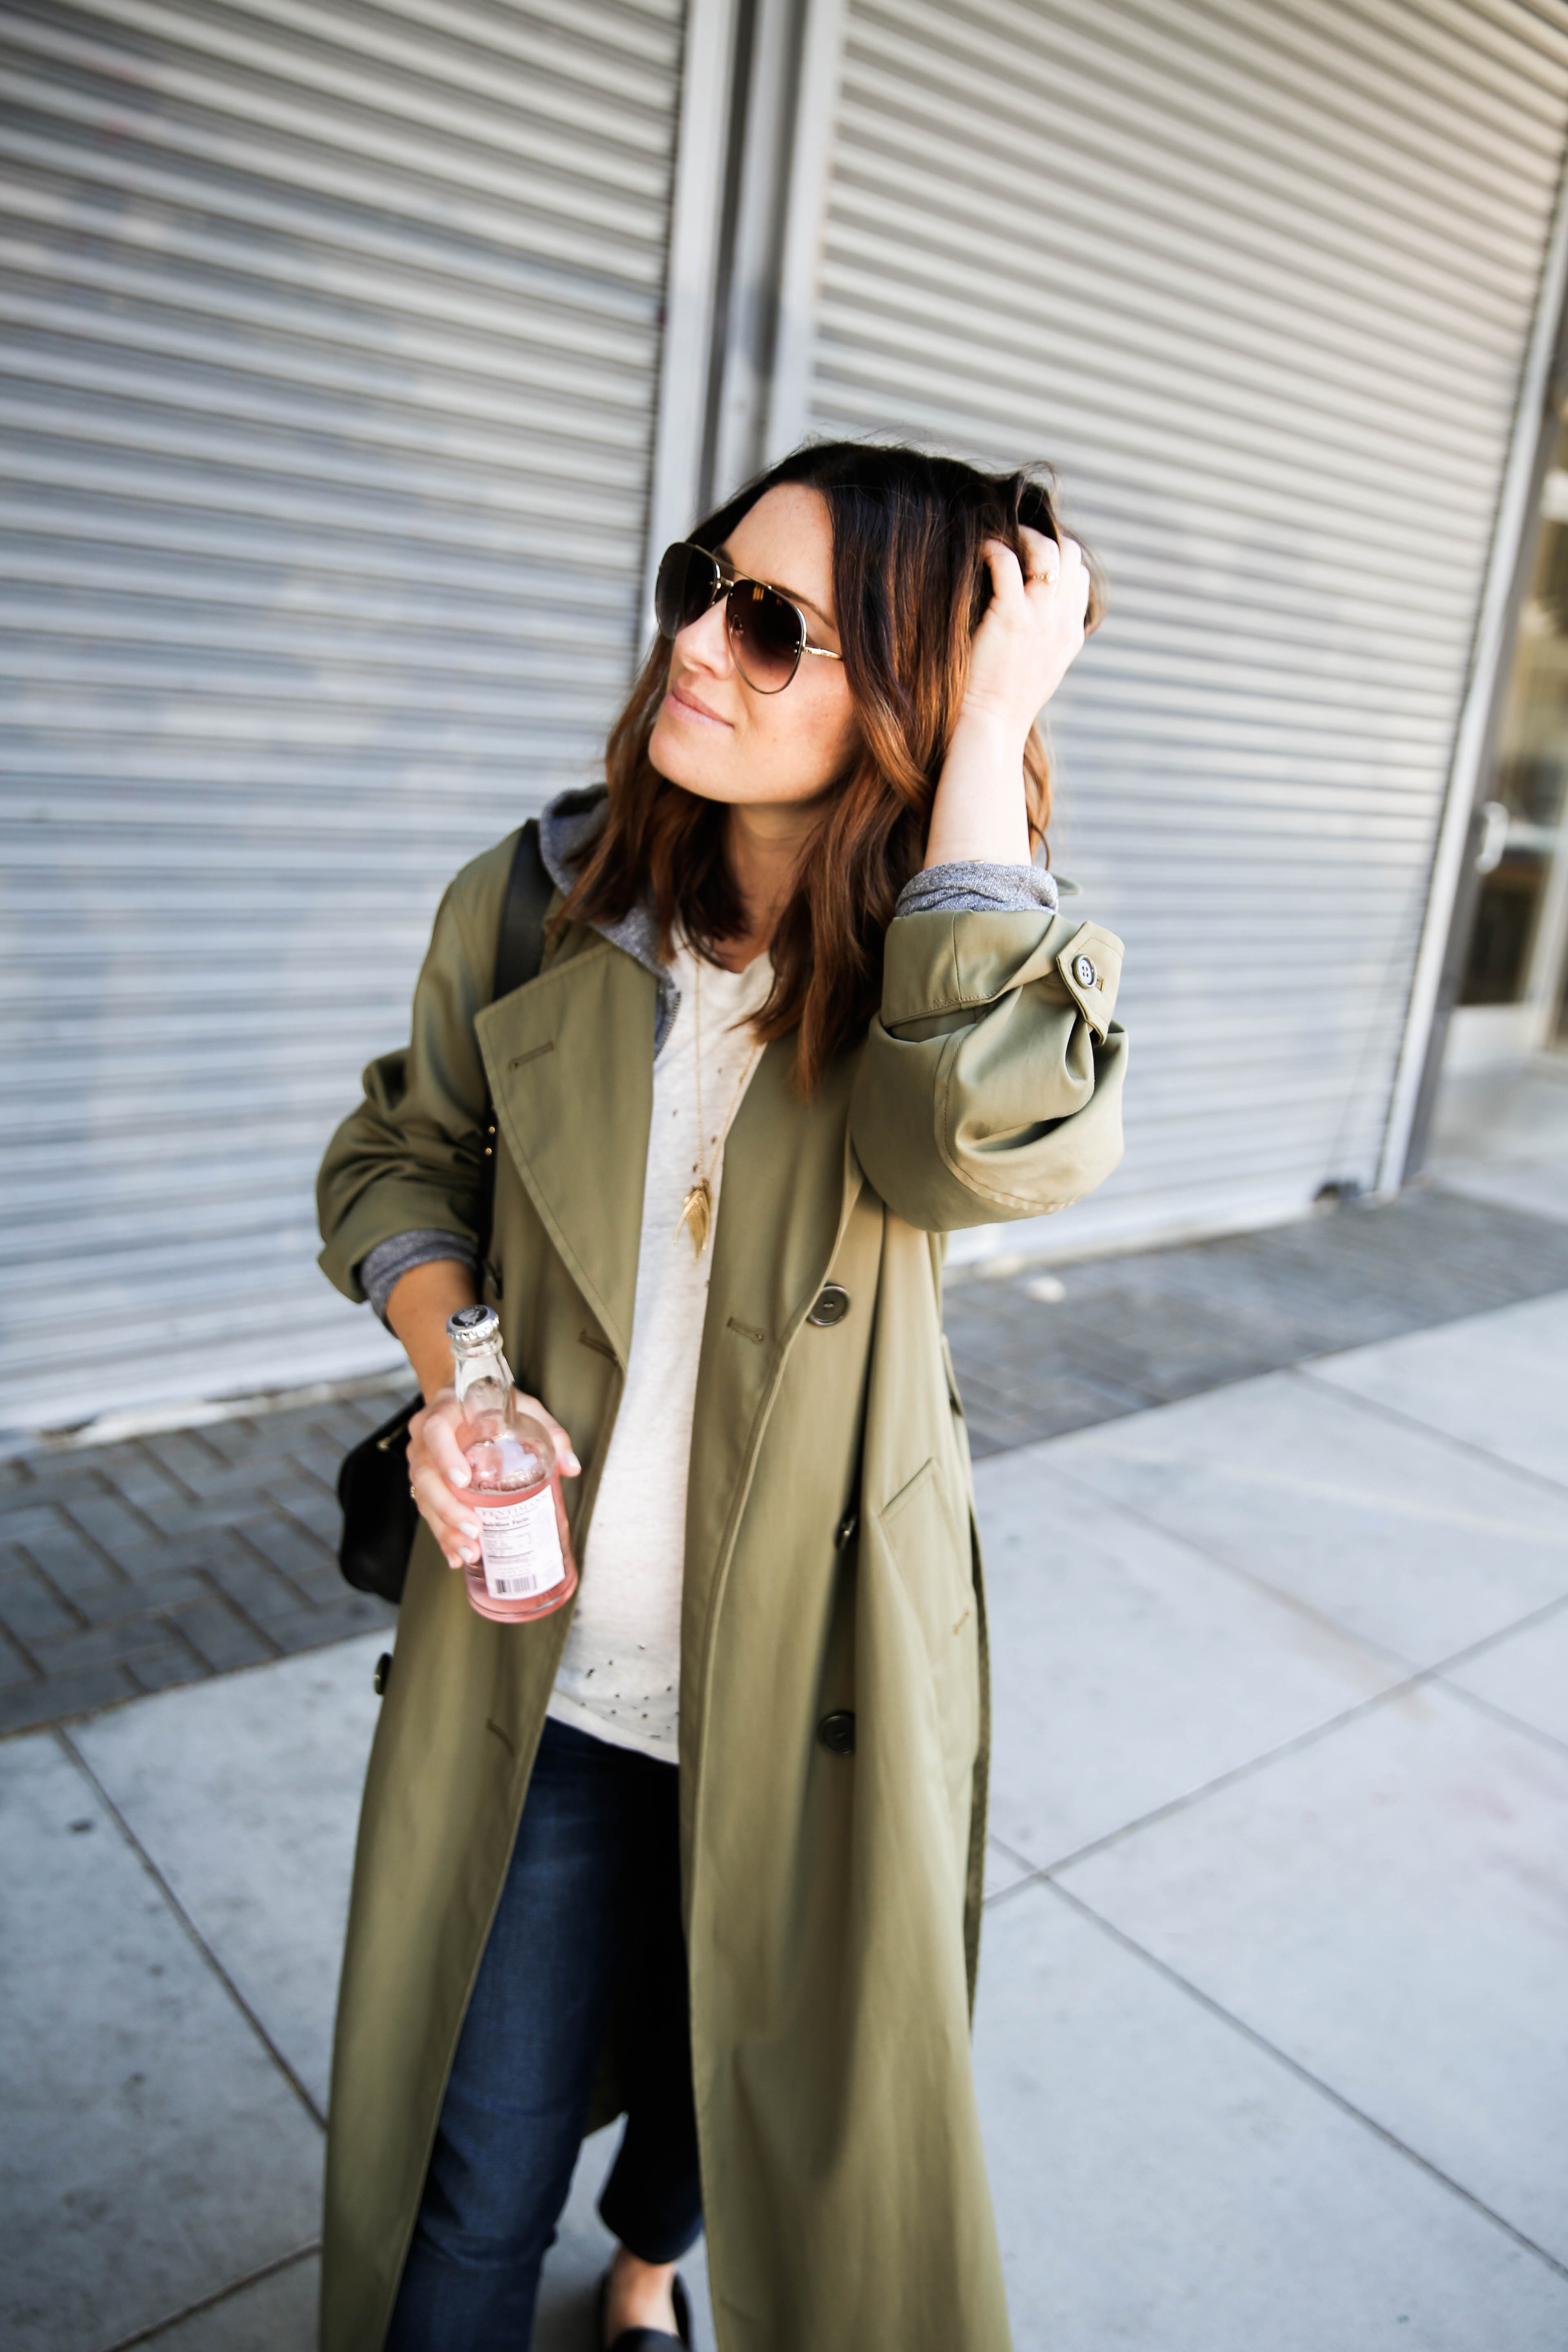 Army-Green Trench | Cheetah is the new black | Bloglovin’